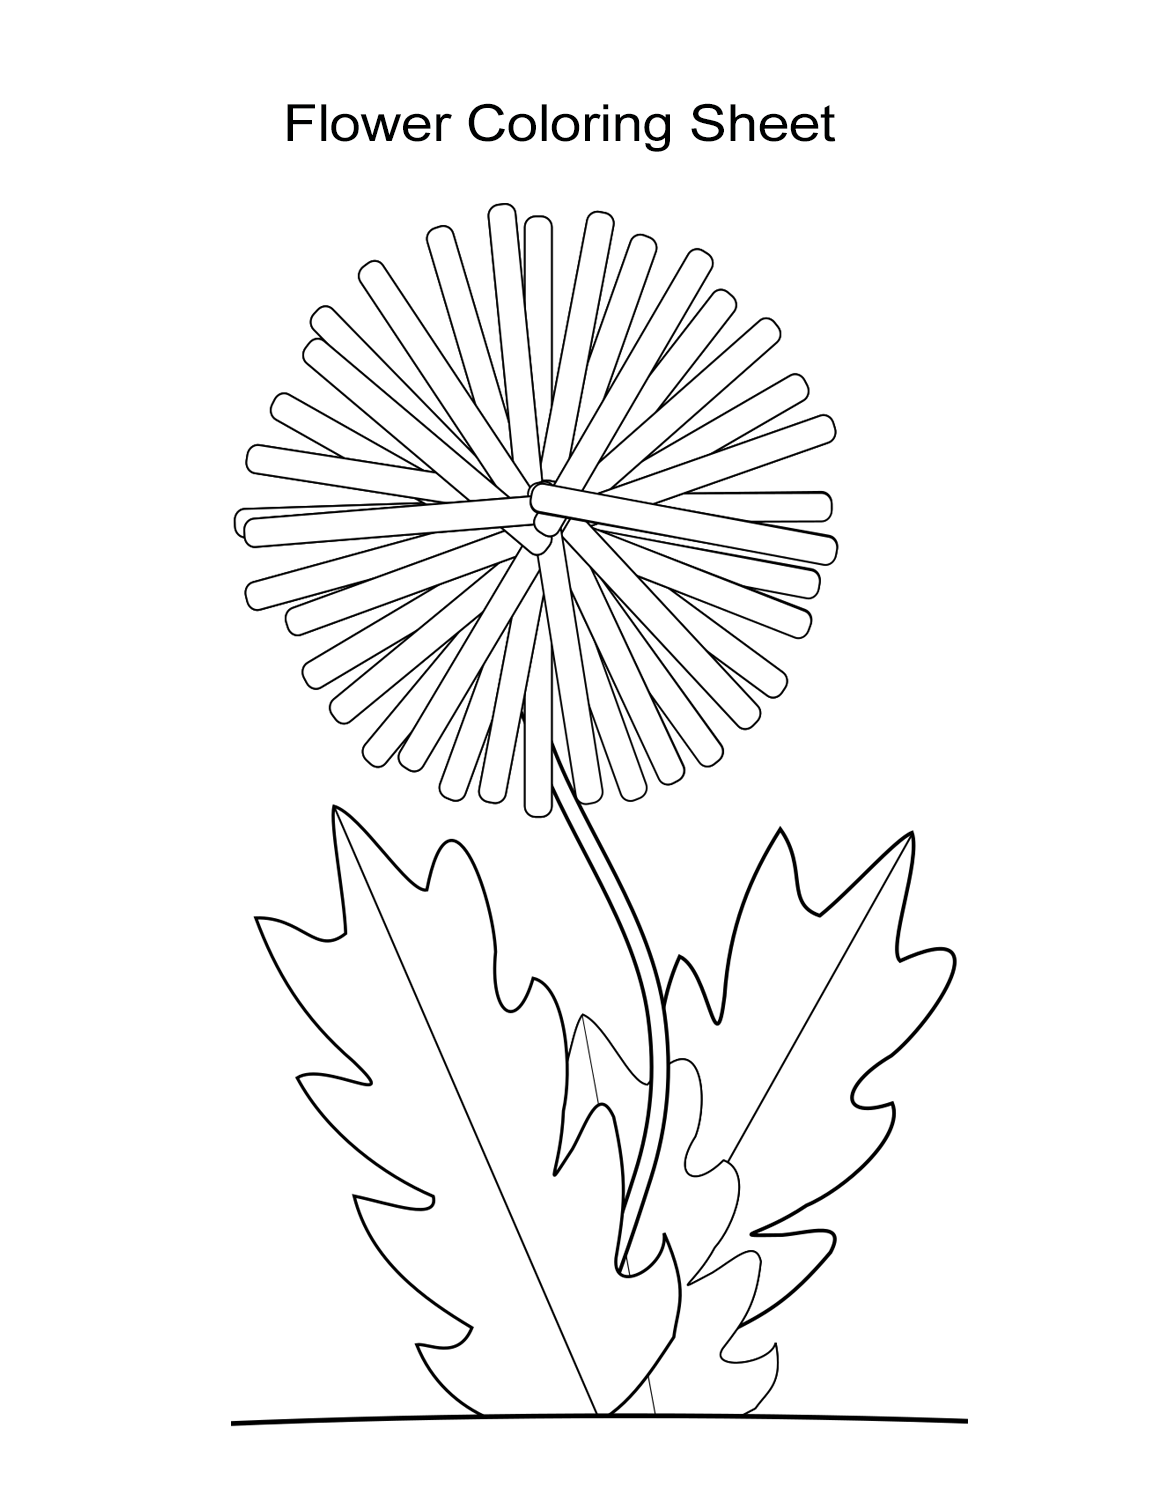 10 Flower Coloring Sheets for Girls and Boys - ALL ESL